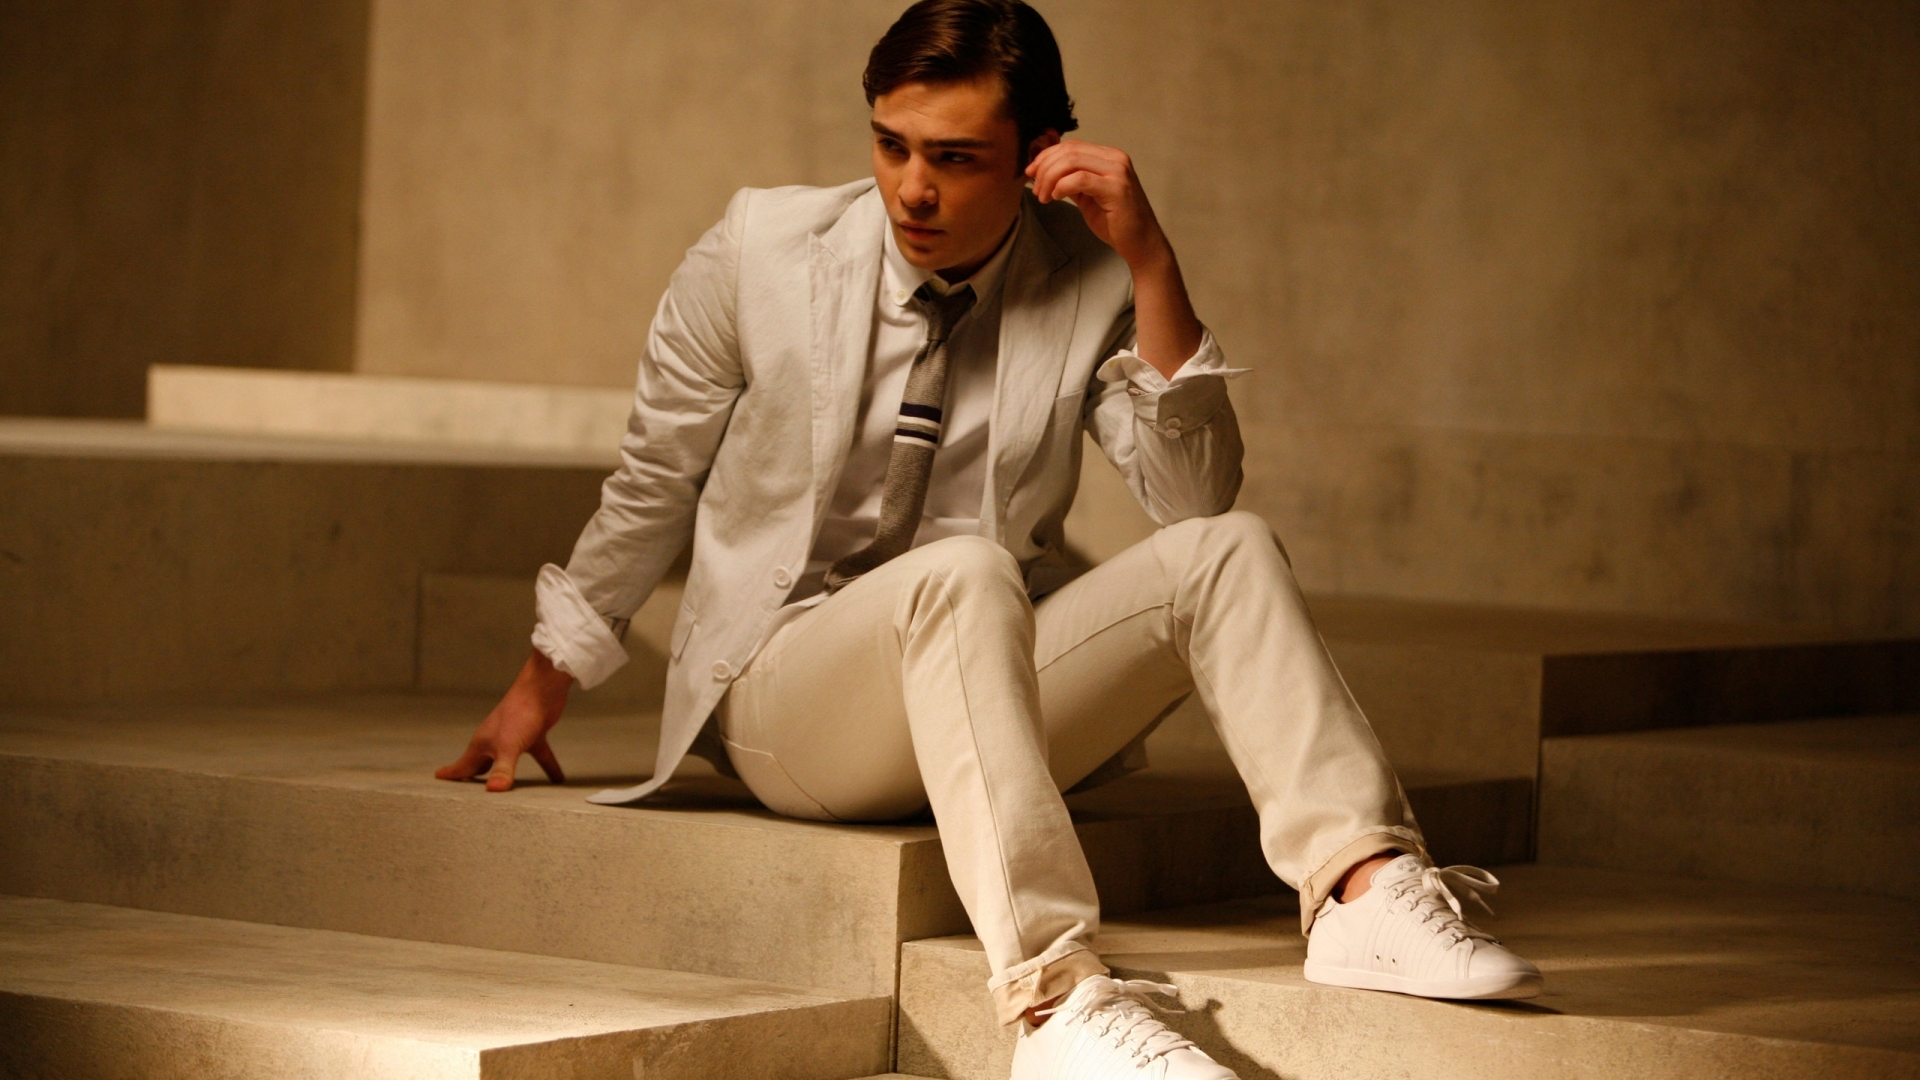 Ed Westwick Pure for 1920 x 1080 HDTV 1080p resolution